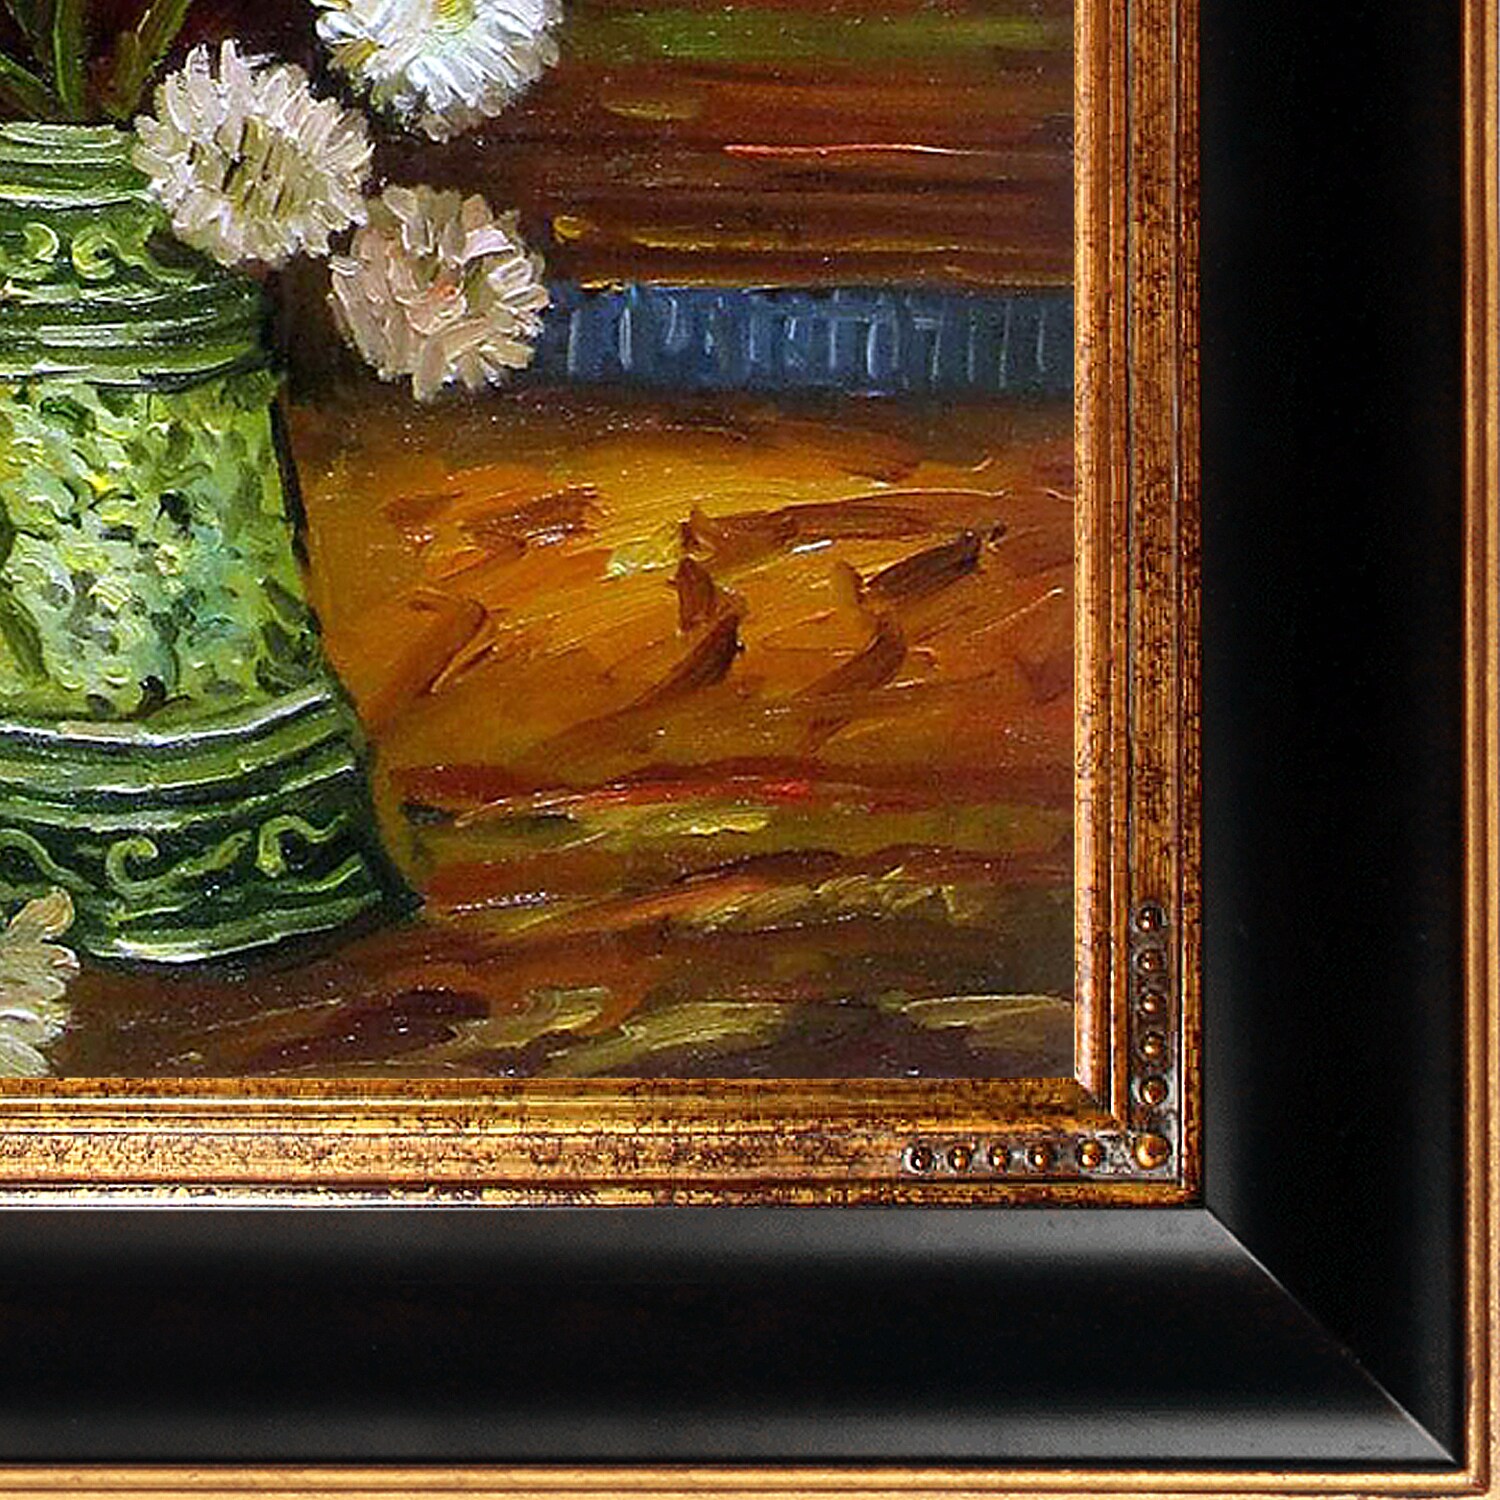 overstockArt Vase with Red Gladioli by Van Gogh with Opulent Frame